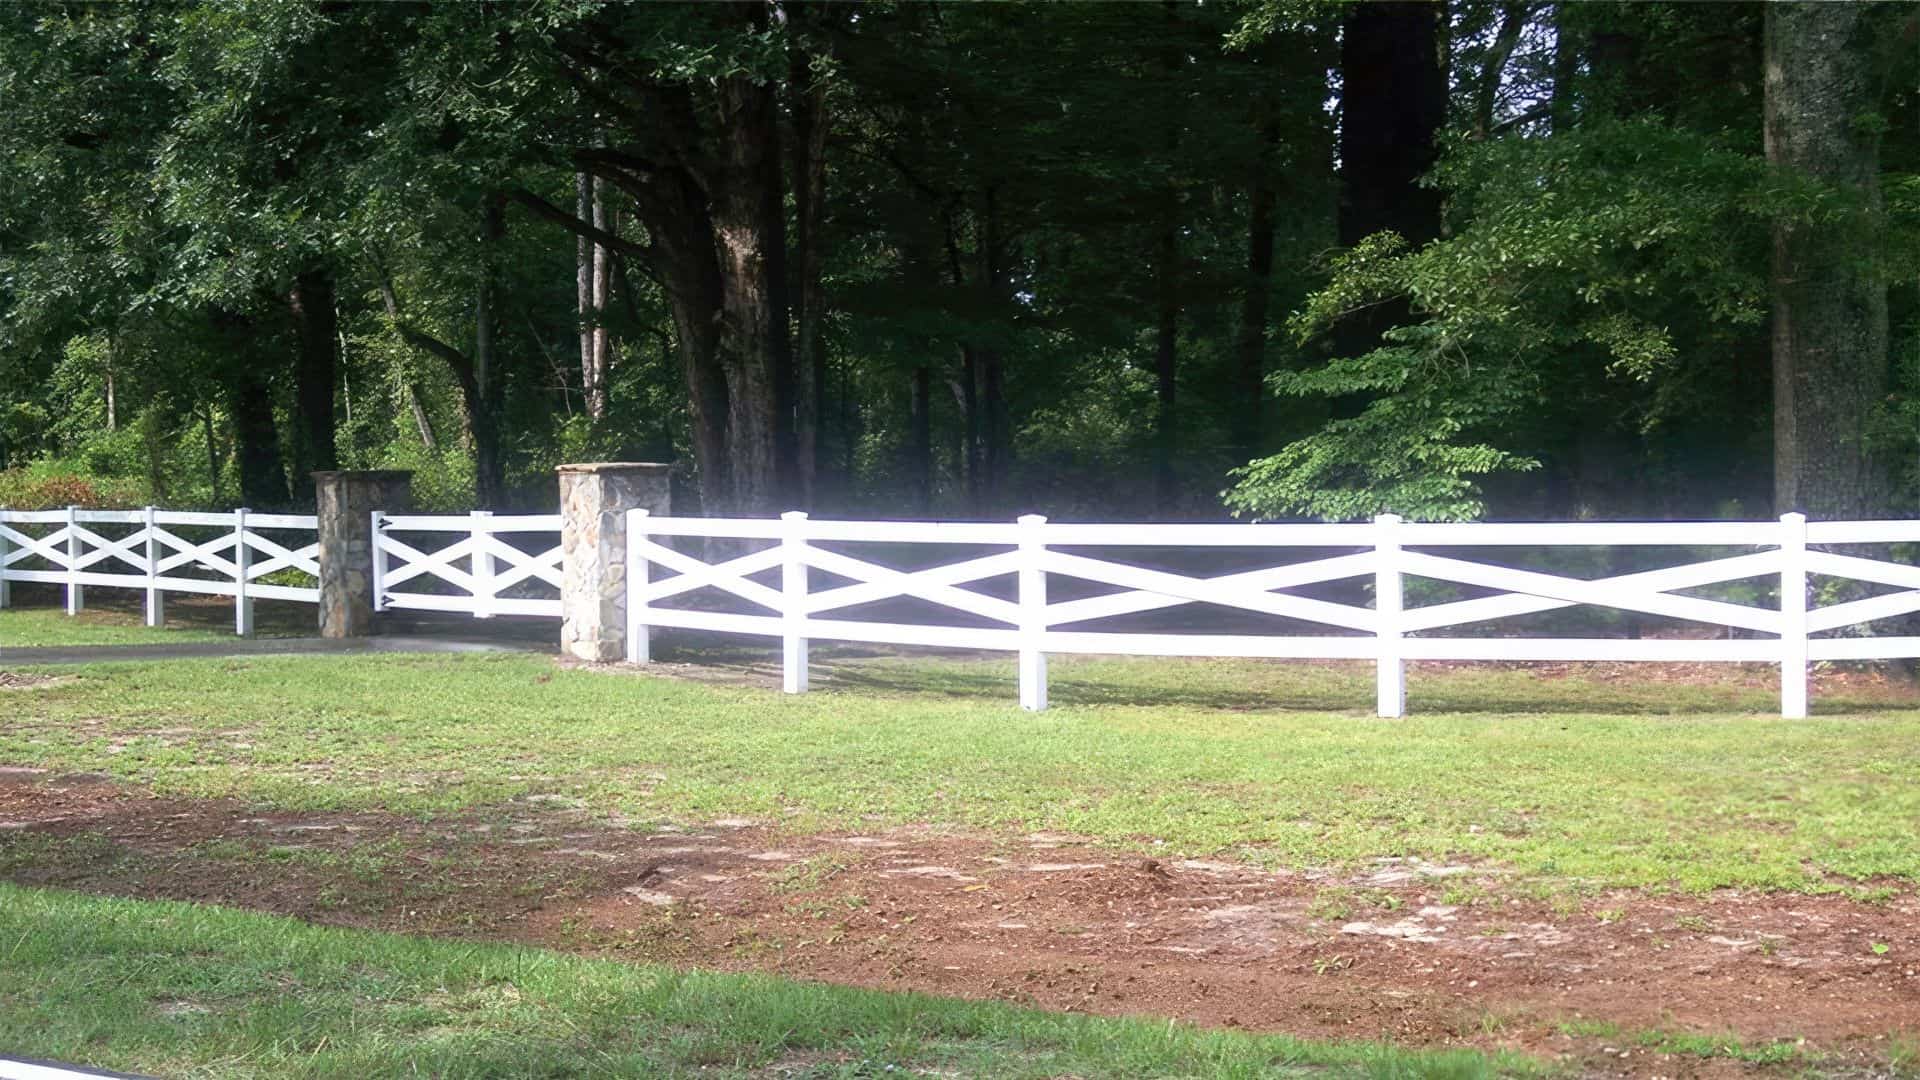 Vinyl cross rail ranch style fence as boundary around farm land for an old timely aesthetic.